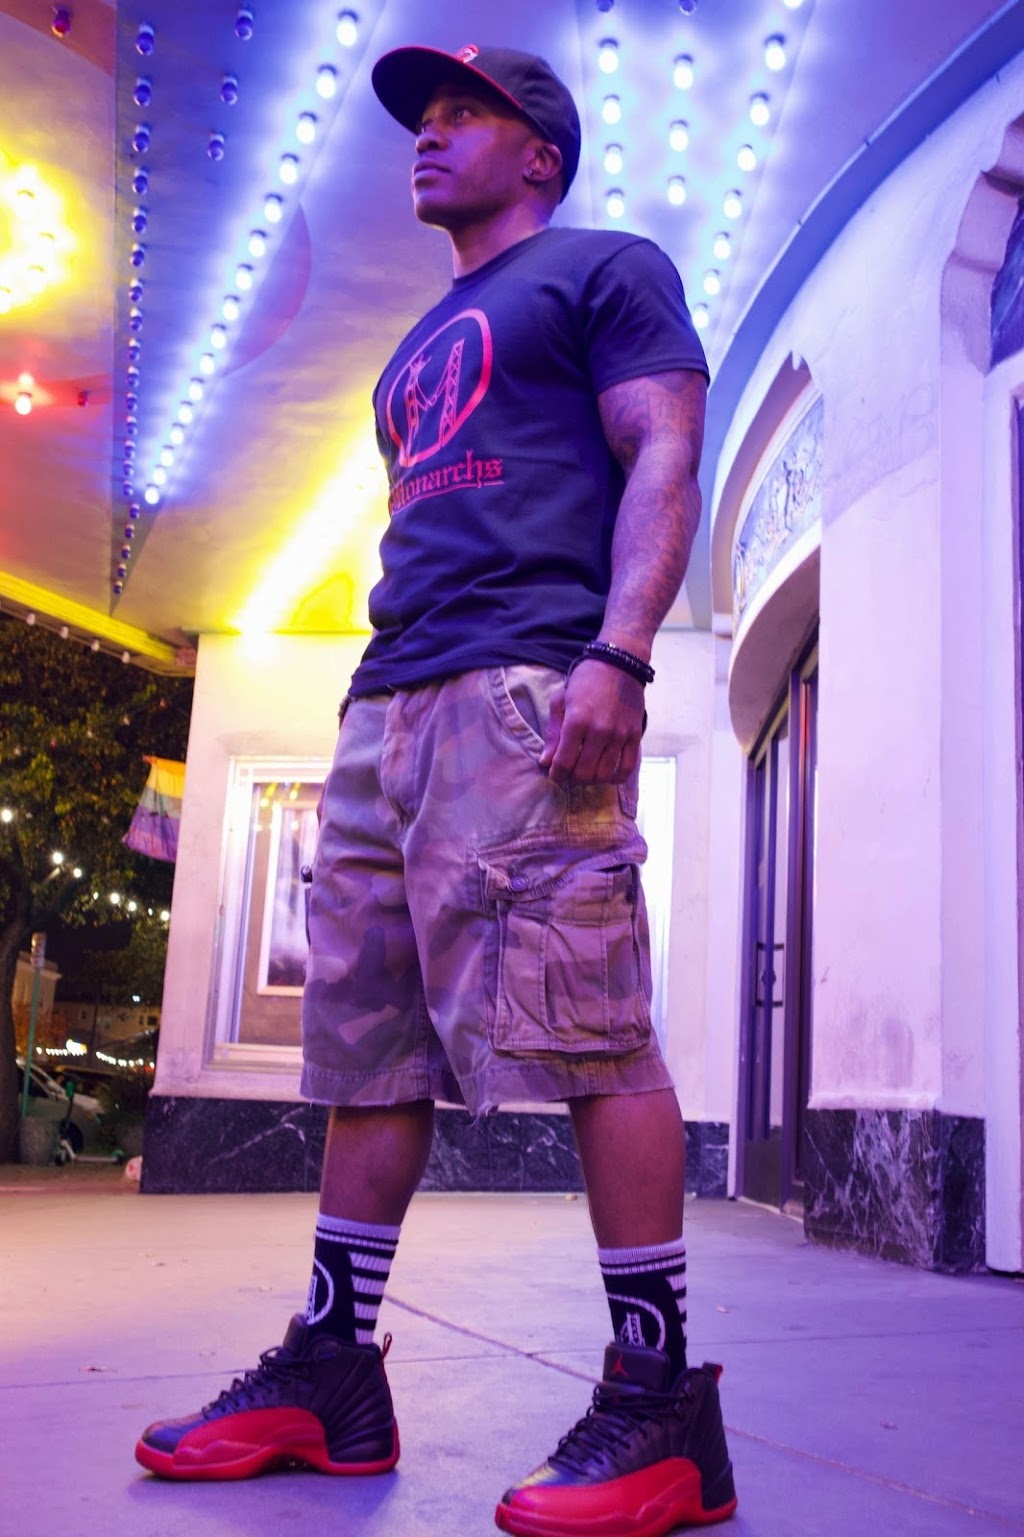 3 Monarchs Clothing Company | 3634 Foothill Blvd #6, Oakland, CA 94601 | Phone: (510) 473-7667